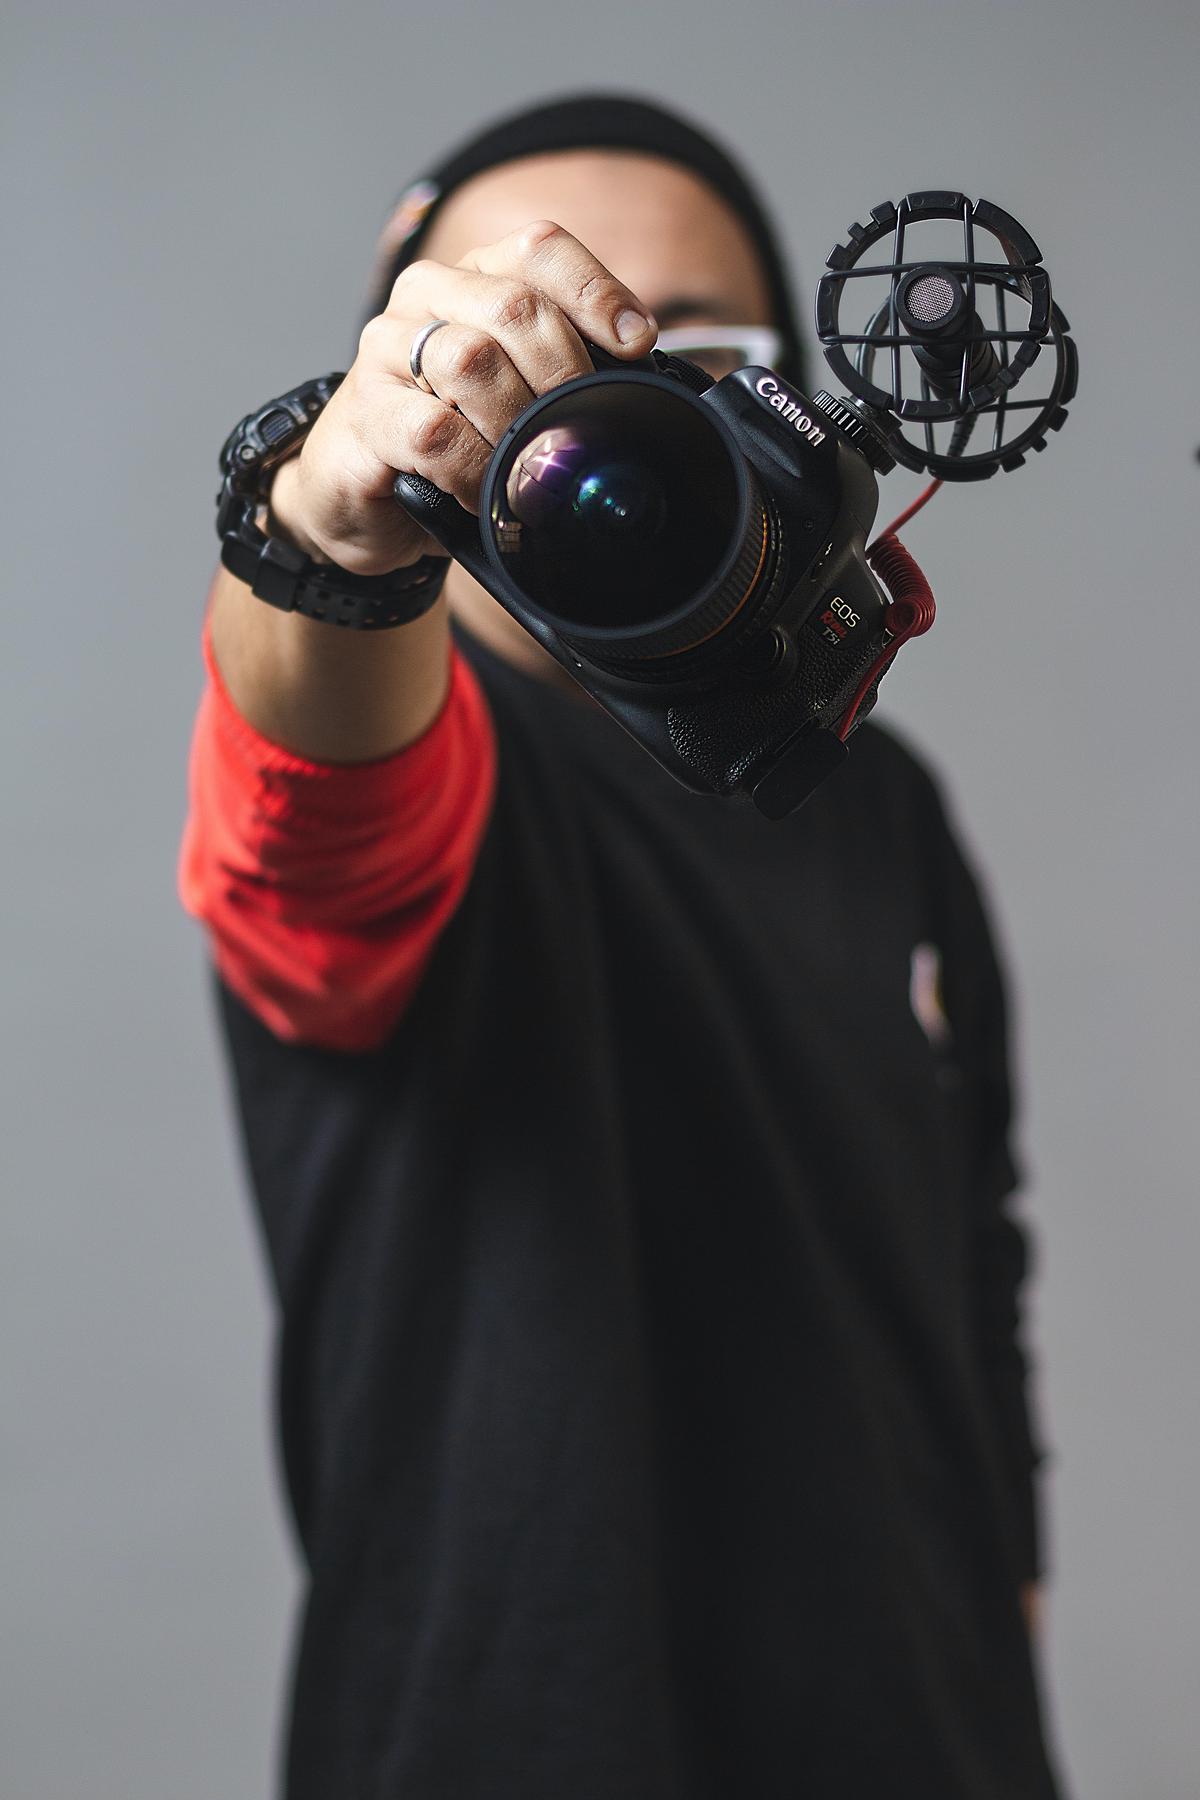 Image of a person holding a camera and planning their vlogging content, symbolizing the process of creating successful vlogs.